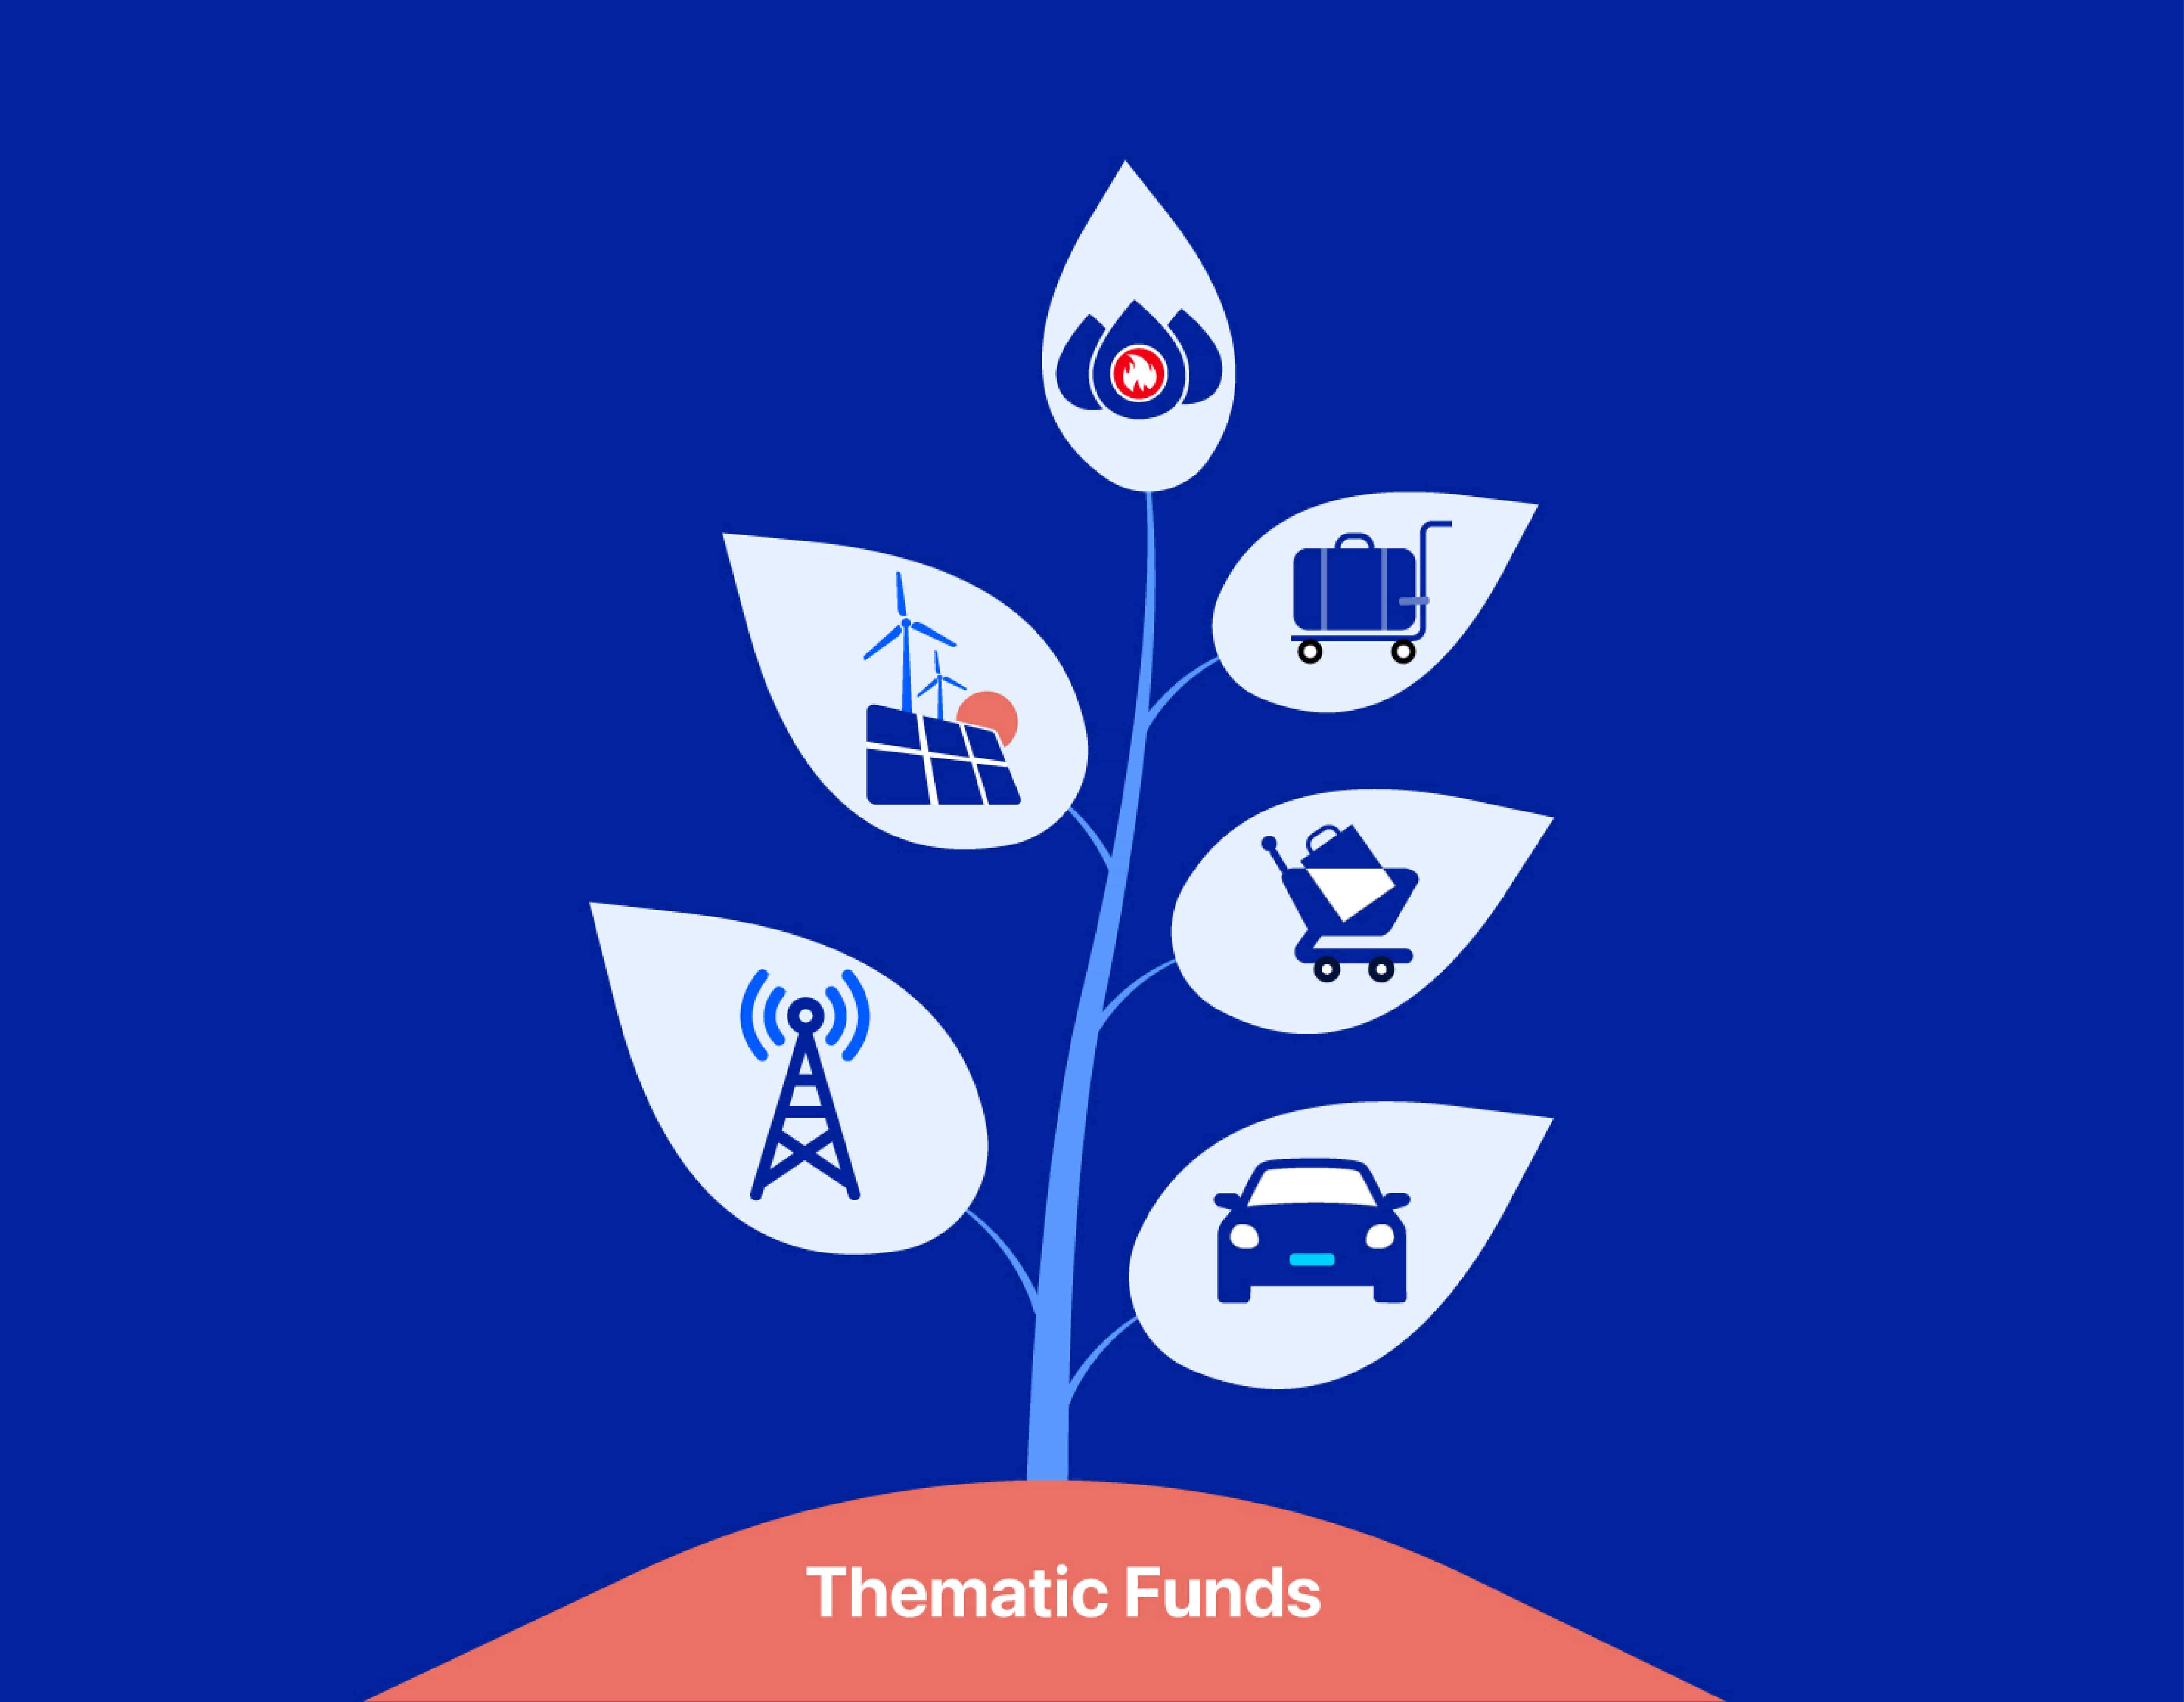 Thematic Funds: Know All About This Mutual Funds That Has
                    Garnered Millennials' Interest